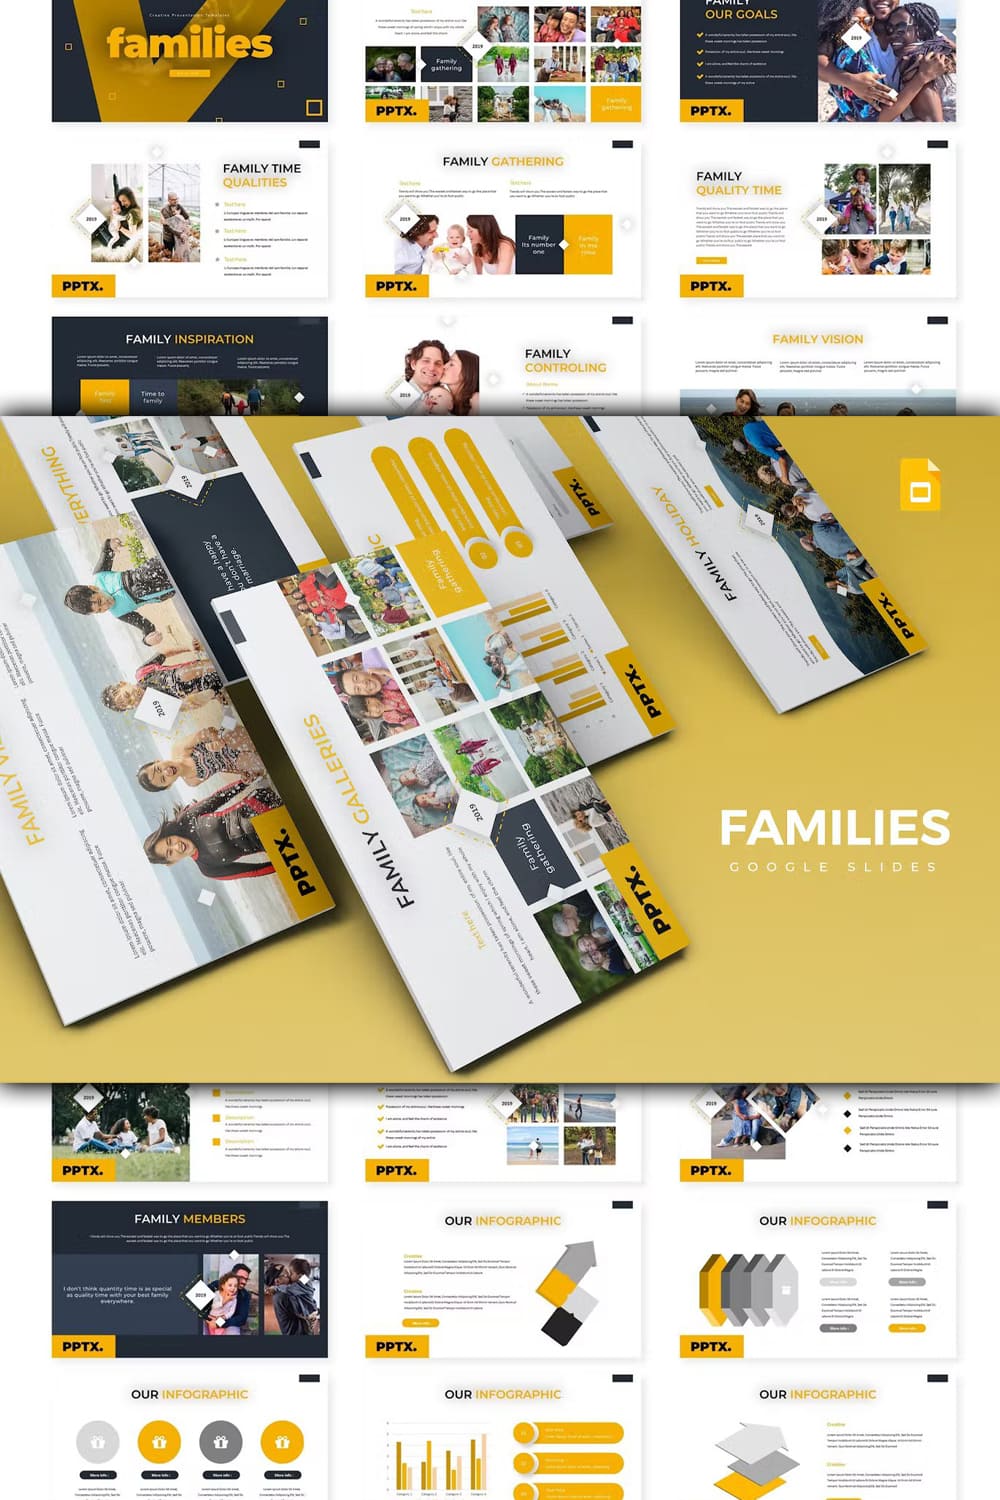 Families powerpoint template - pinterest image preview.